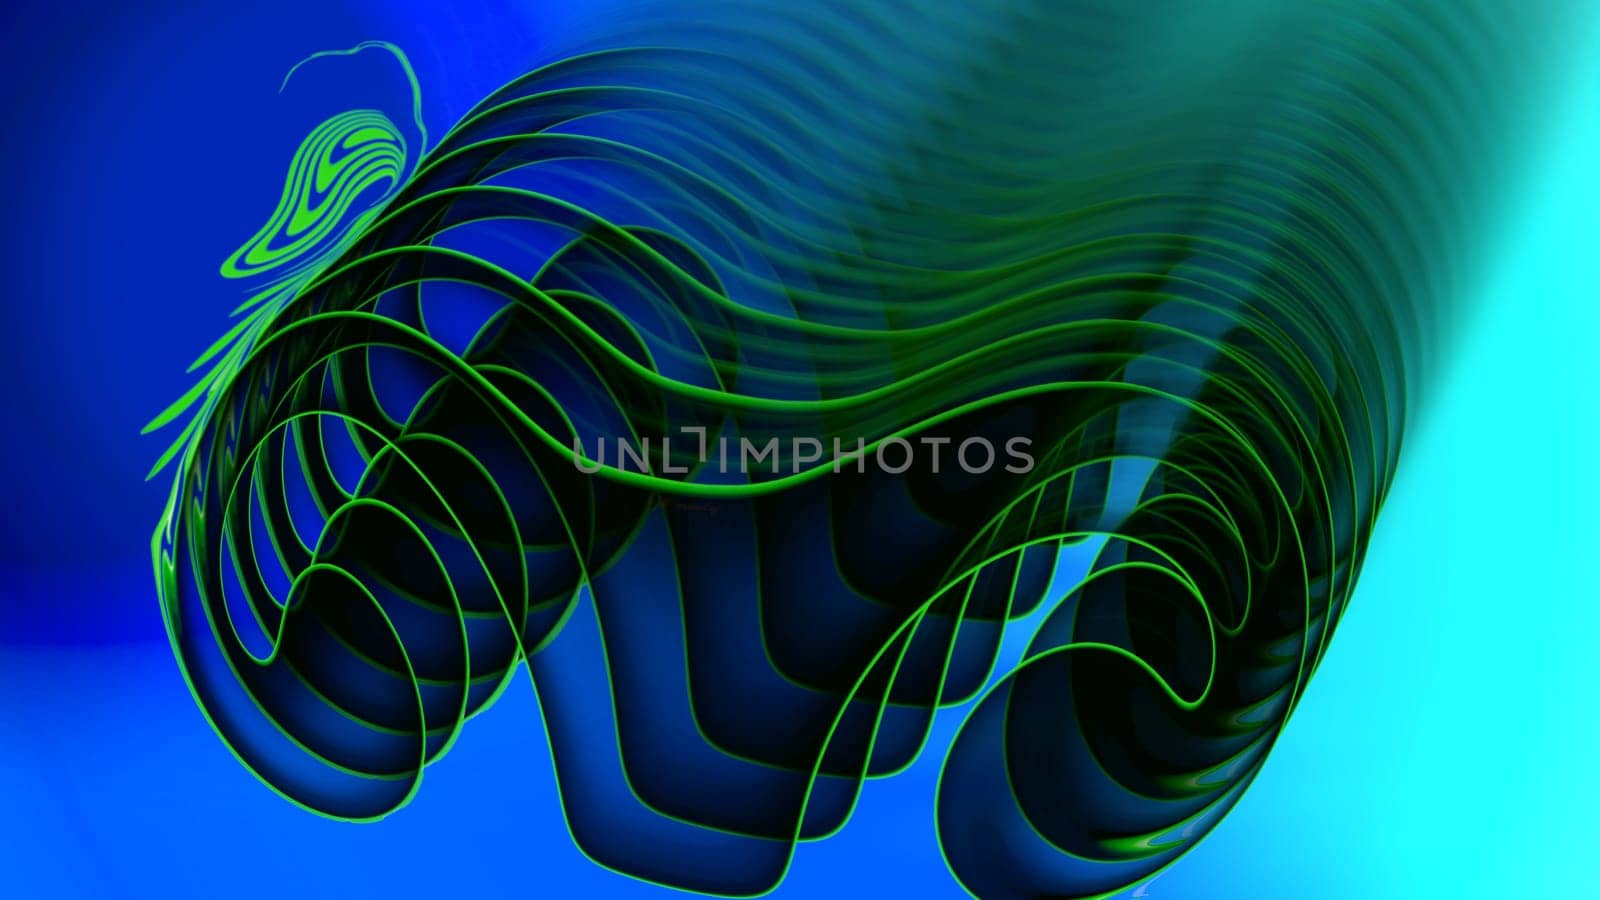 Abstract 3D drawing similar to an Aries, ski mask, sunglasses or gladiator mask.